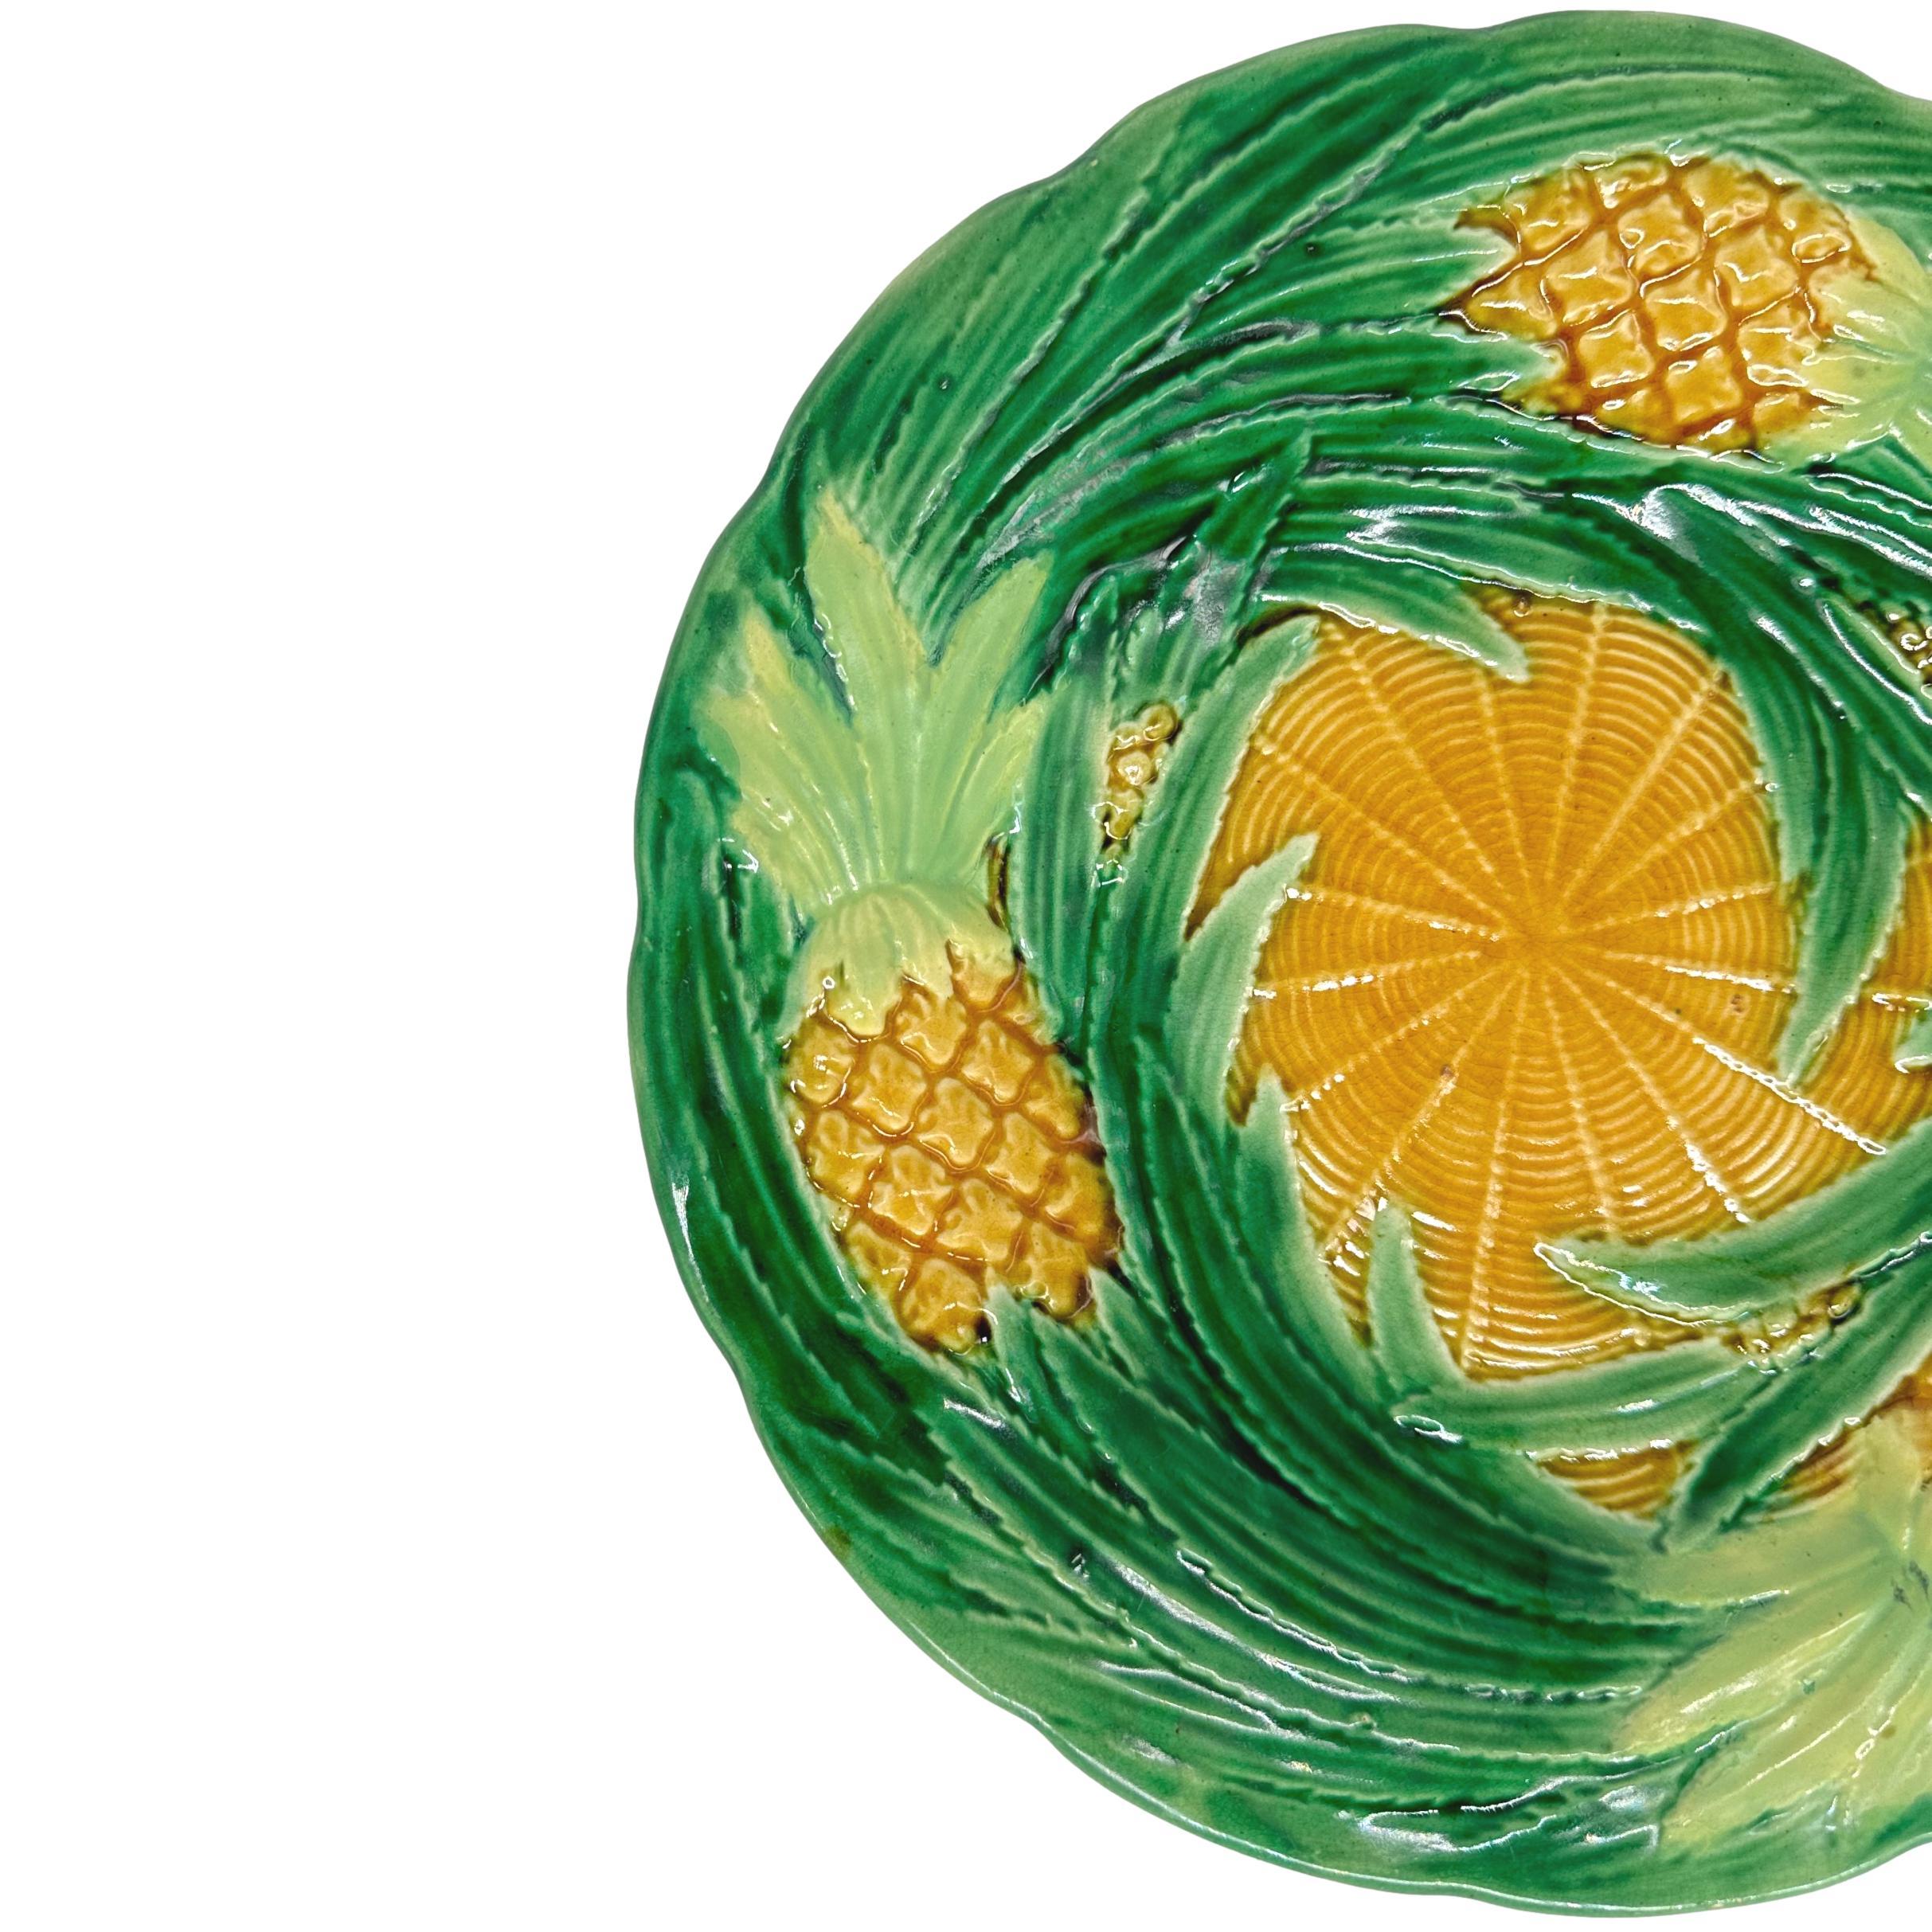 A George Jones Majolica Dessert Plate, with relief-molded pineapples and swirling green-glazed leaves, the center with yellow ocher-glazed simulated basketweave, the reverse with typical tortoiseshell mottling, English, ca. 1870.  Design number